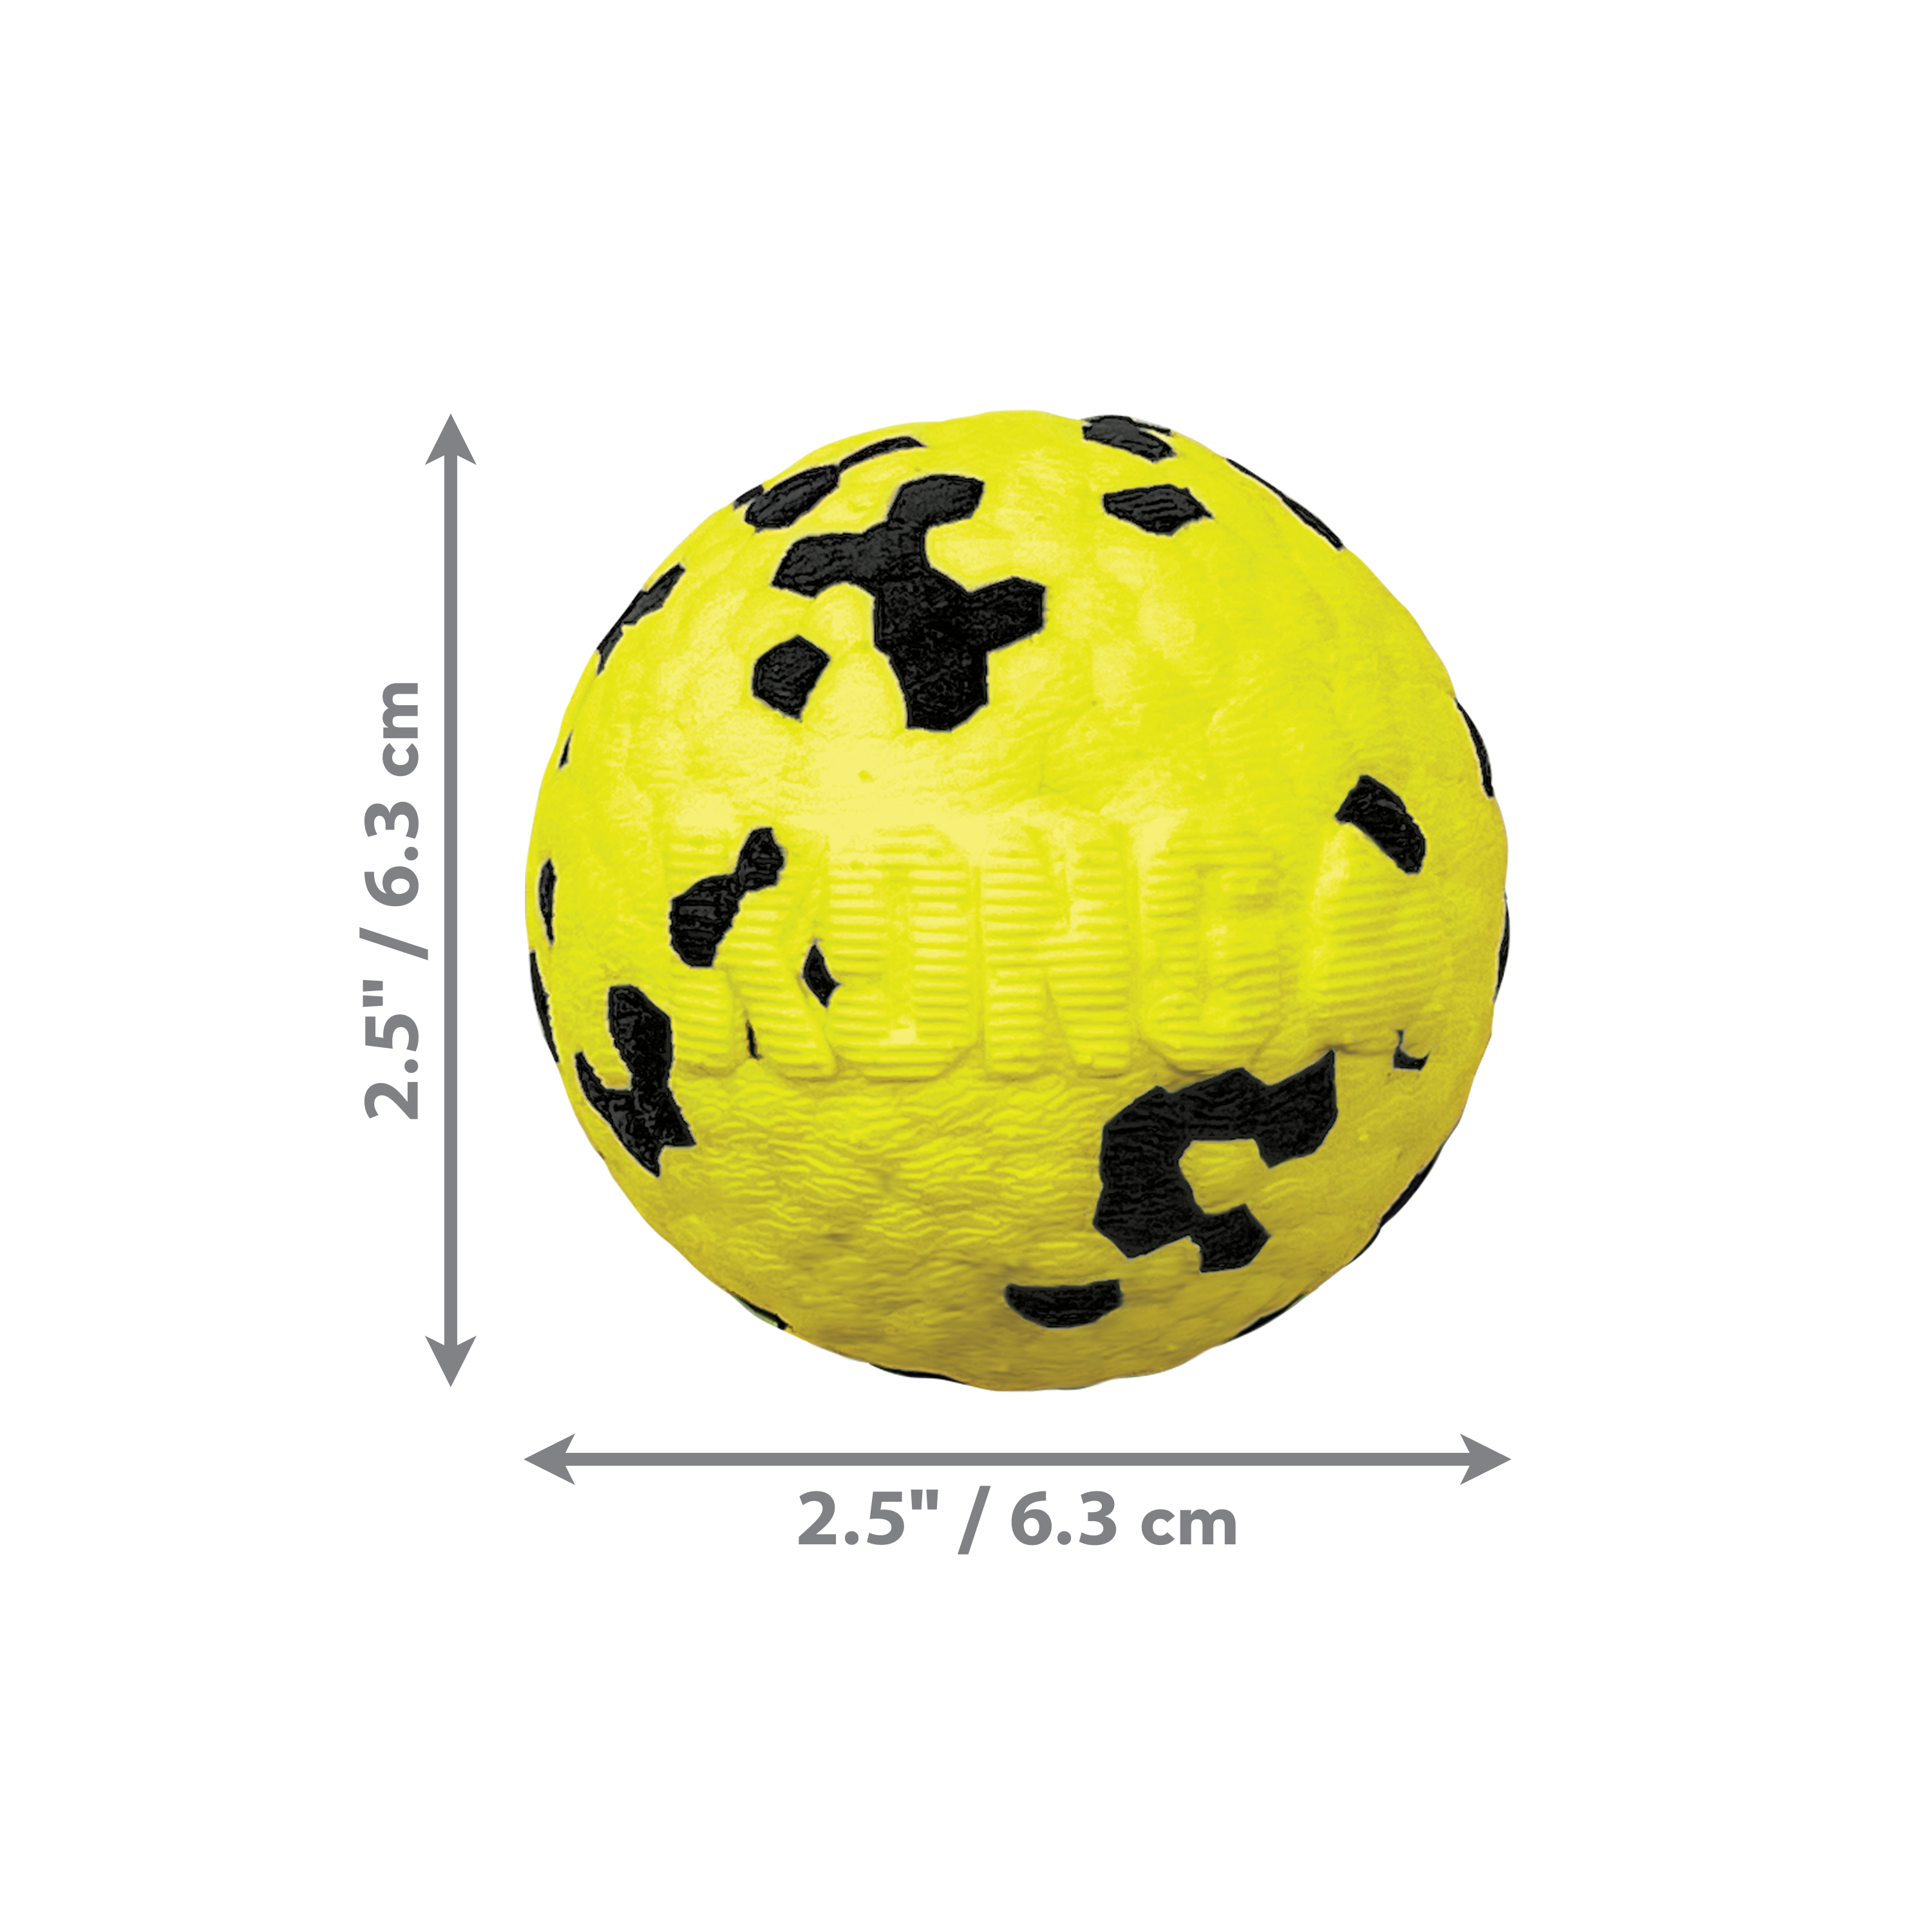 Reflex Ball dimoffpack product image